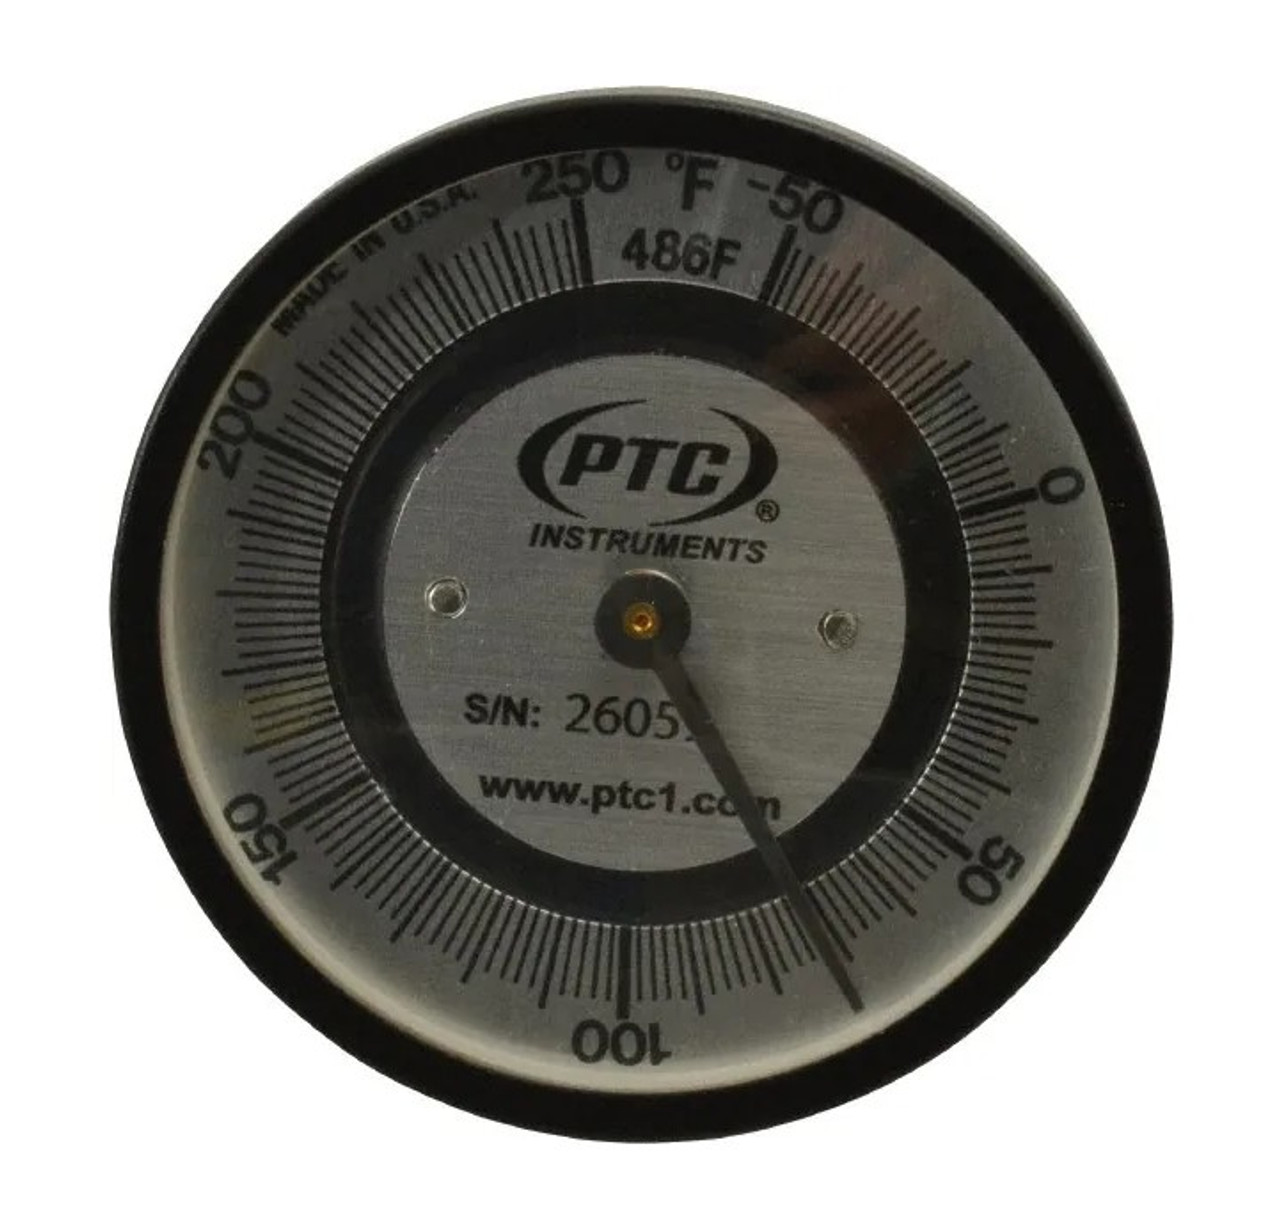 Pipe Surface Spring Held Thermometer -50 to 250 degrees PTC 486F